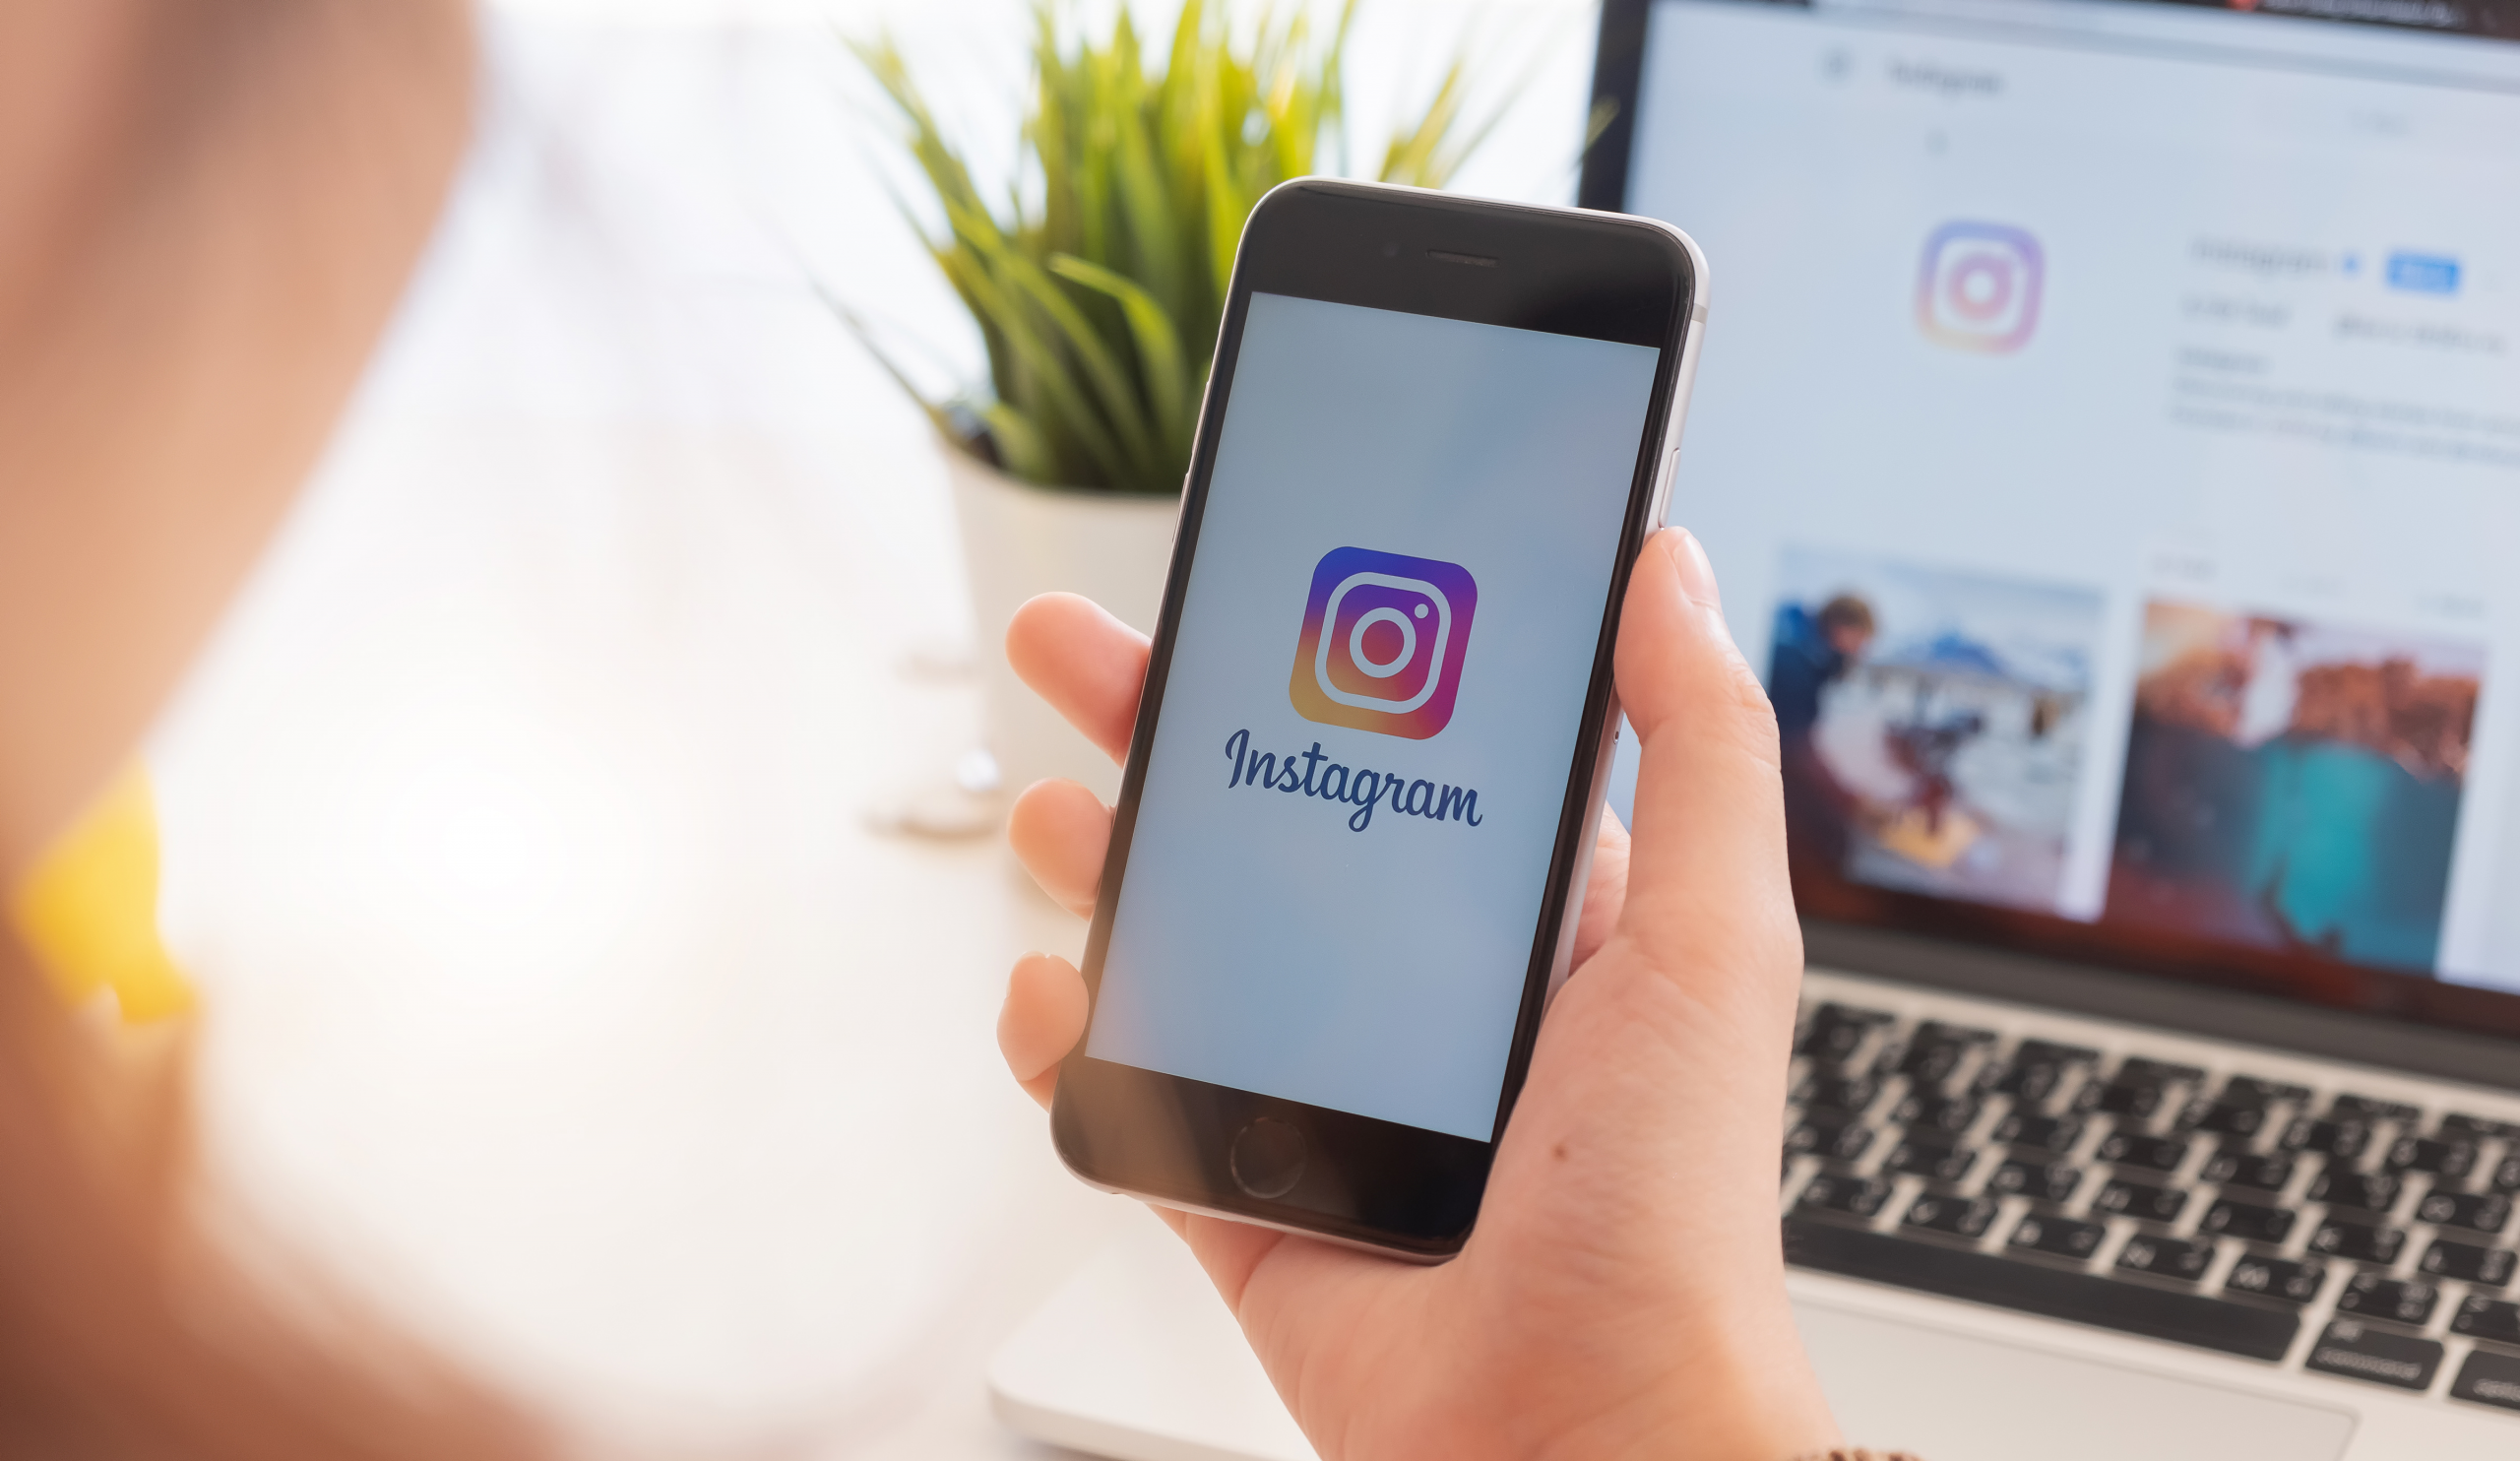 Creating Instagram content: tips from a community manager